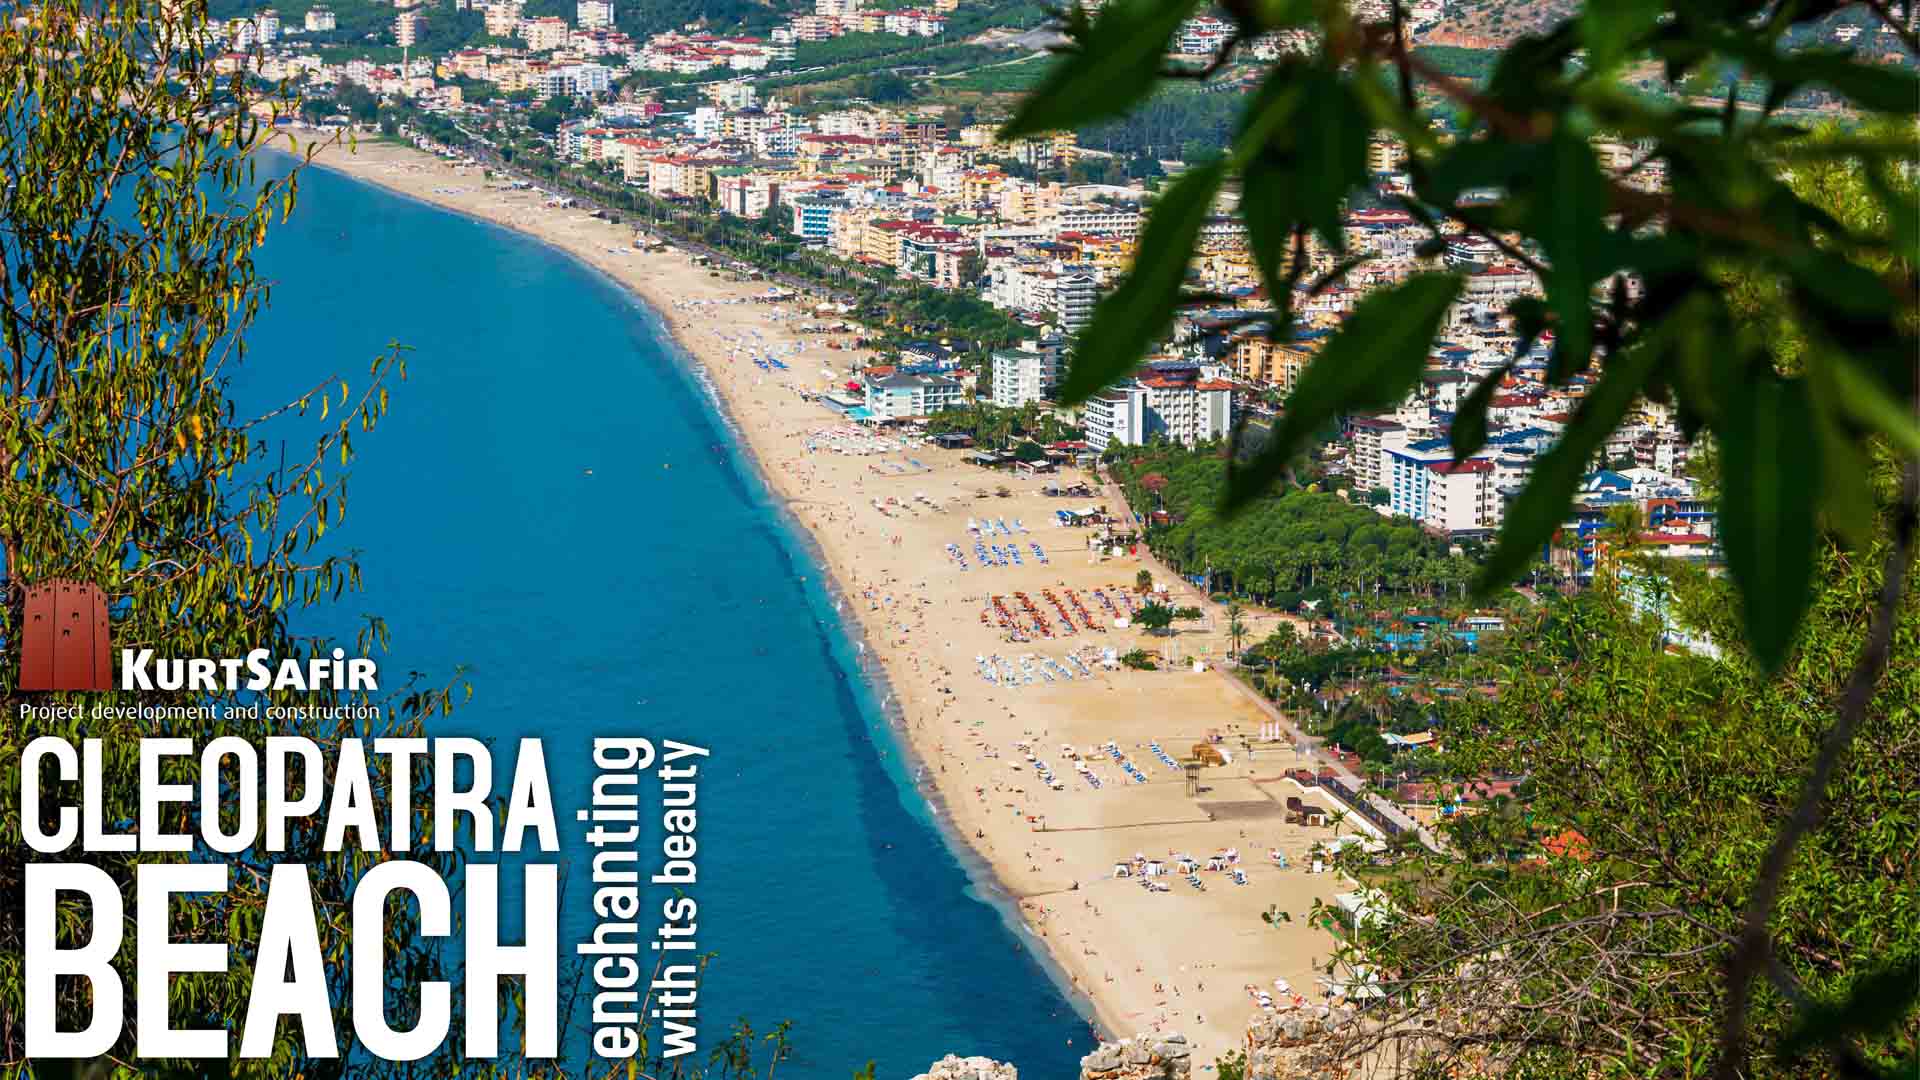 Guide to Cleopatra Beach in Alanya: Access, Attractions, and Tips